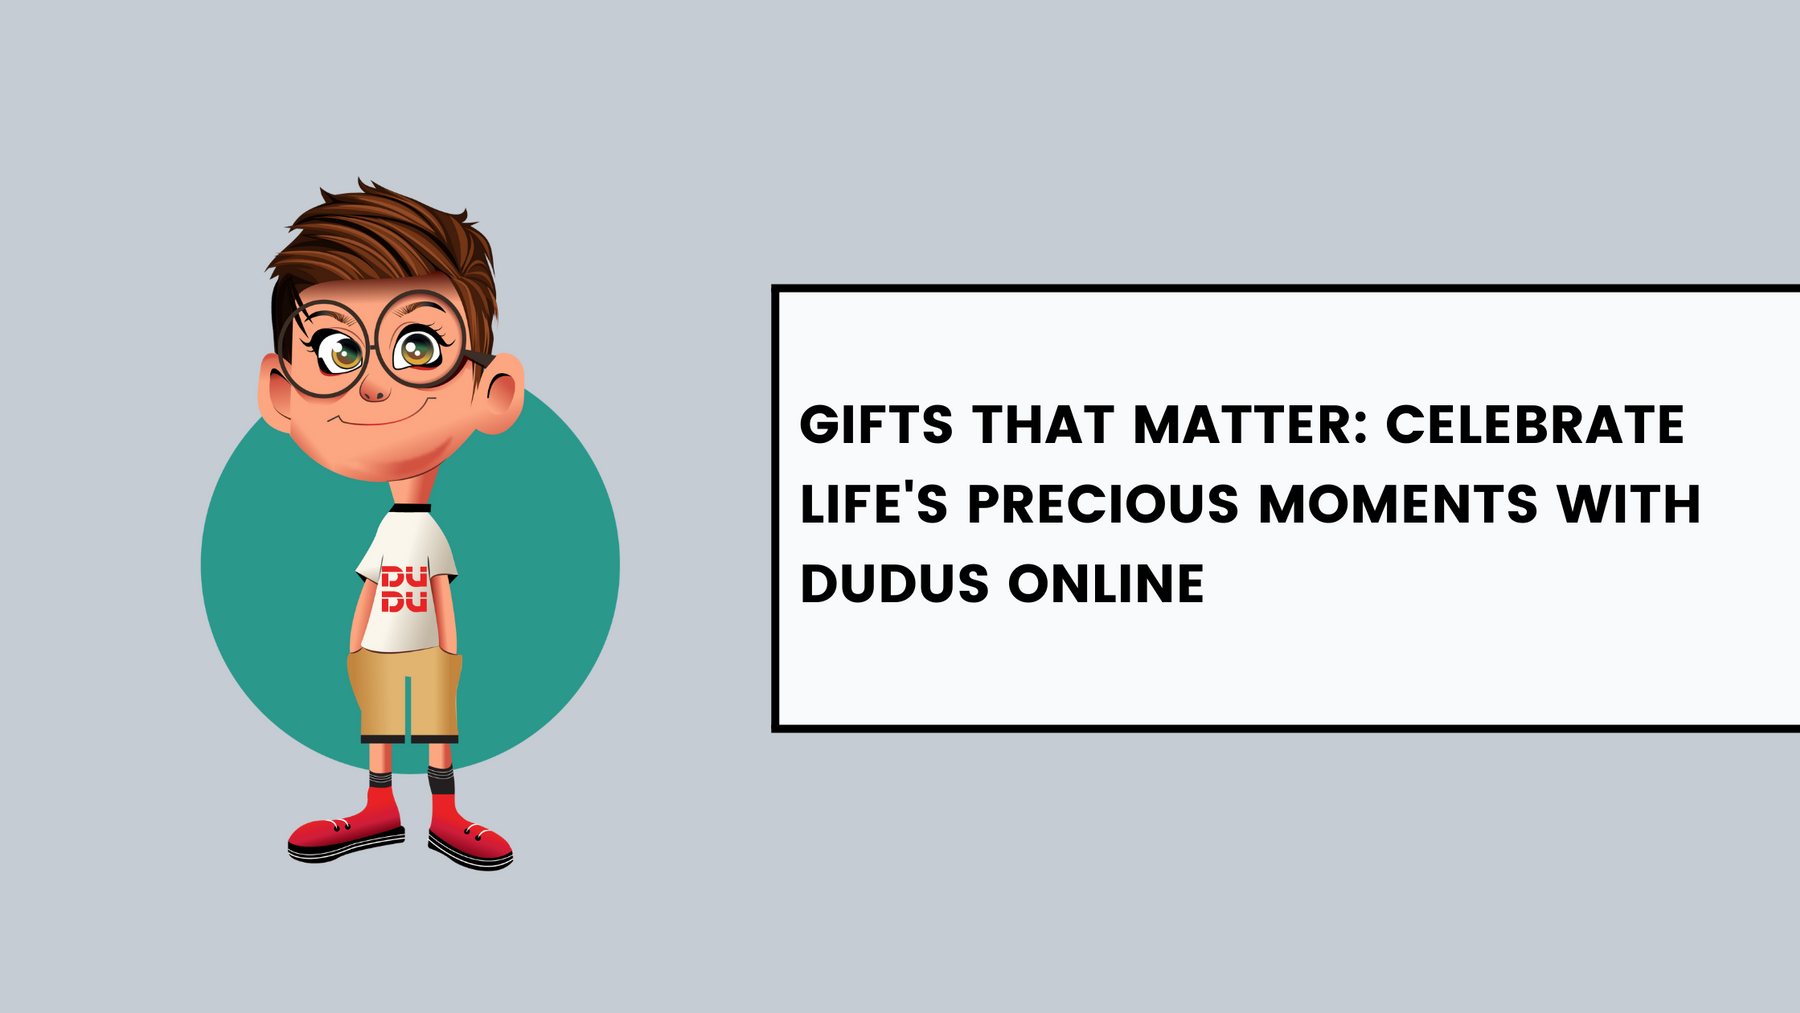 Gifts That Matter: Celebrate Life's Precious Moments With Dudus Online